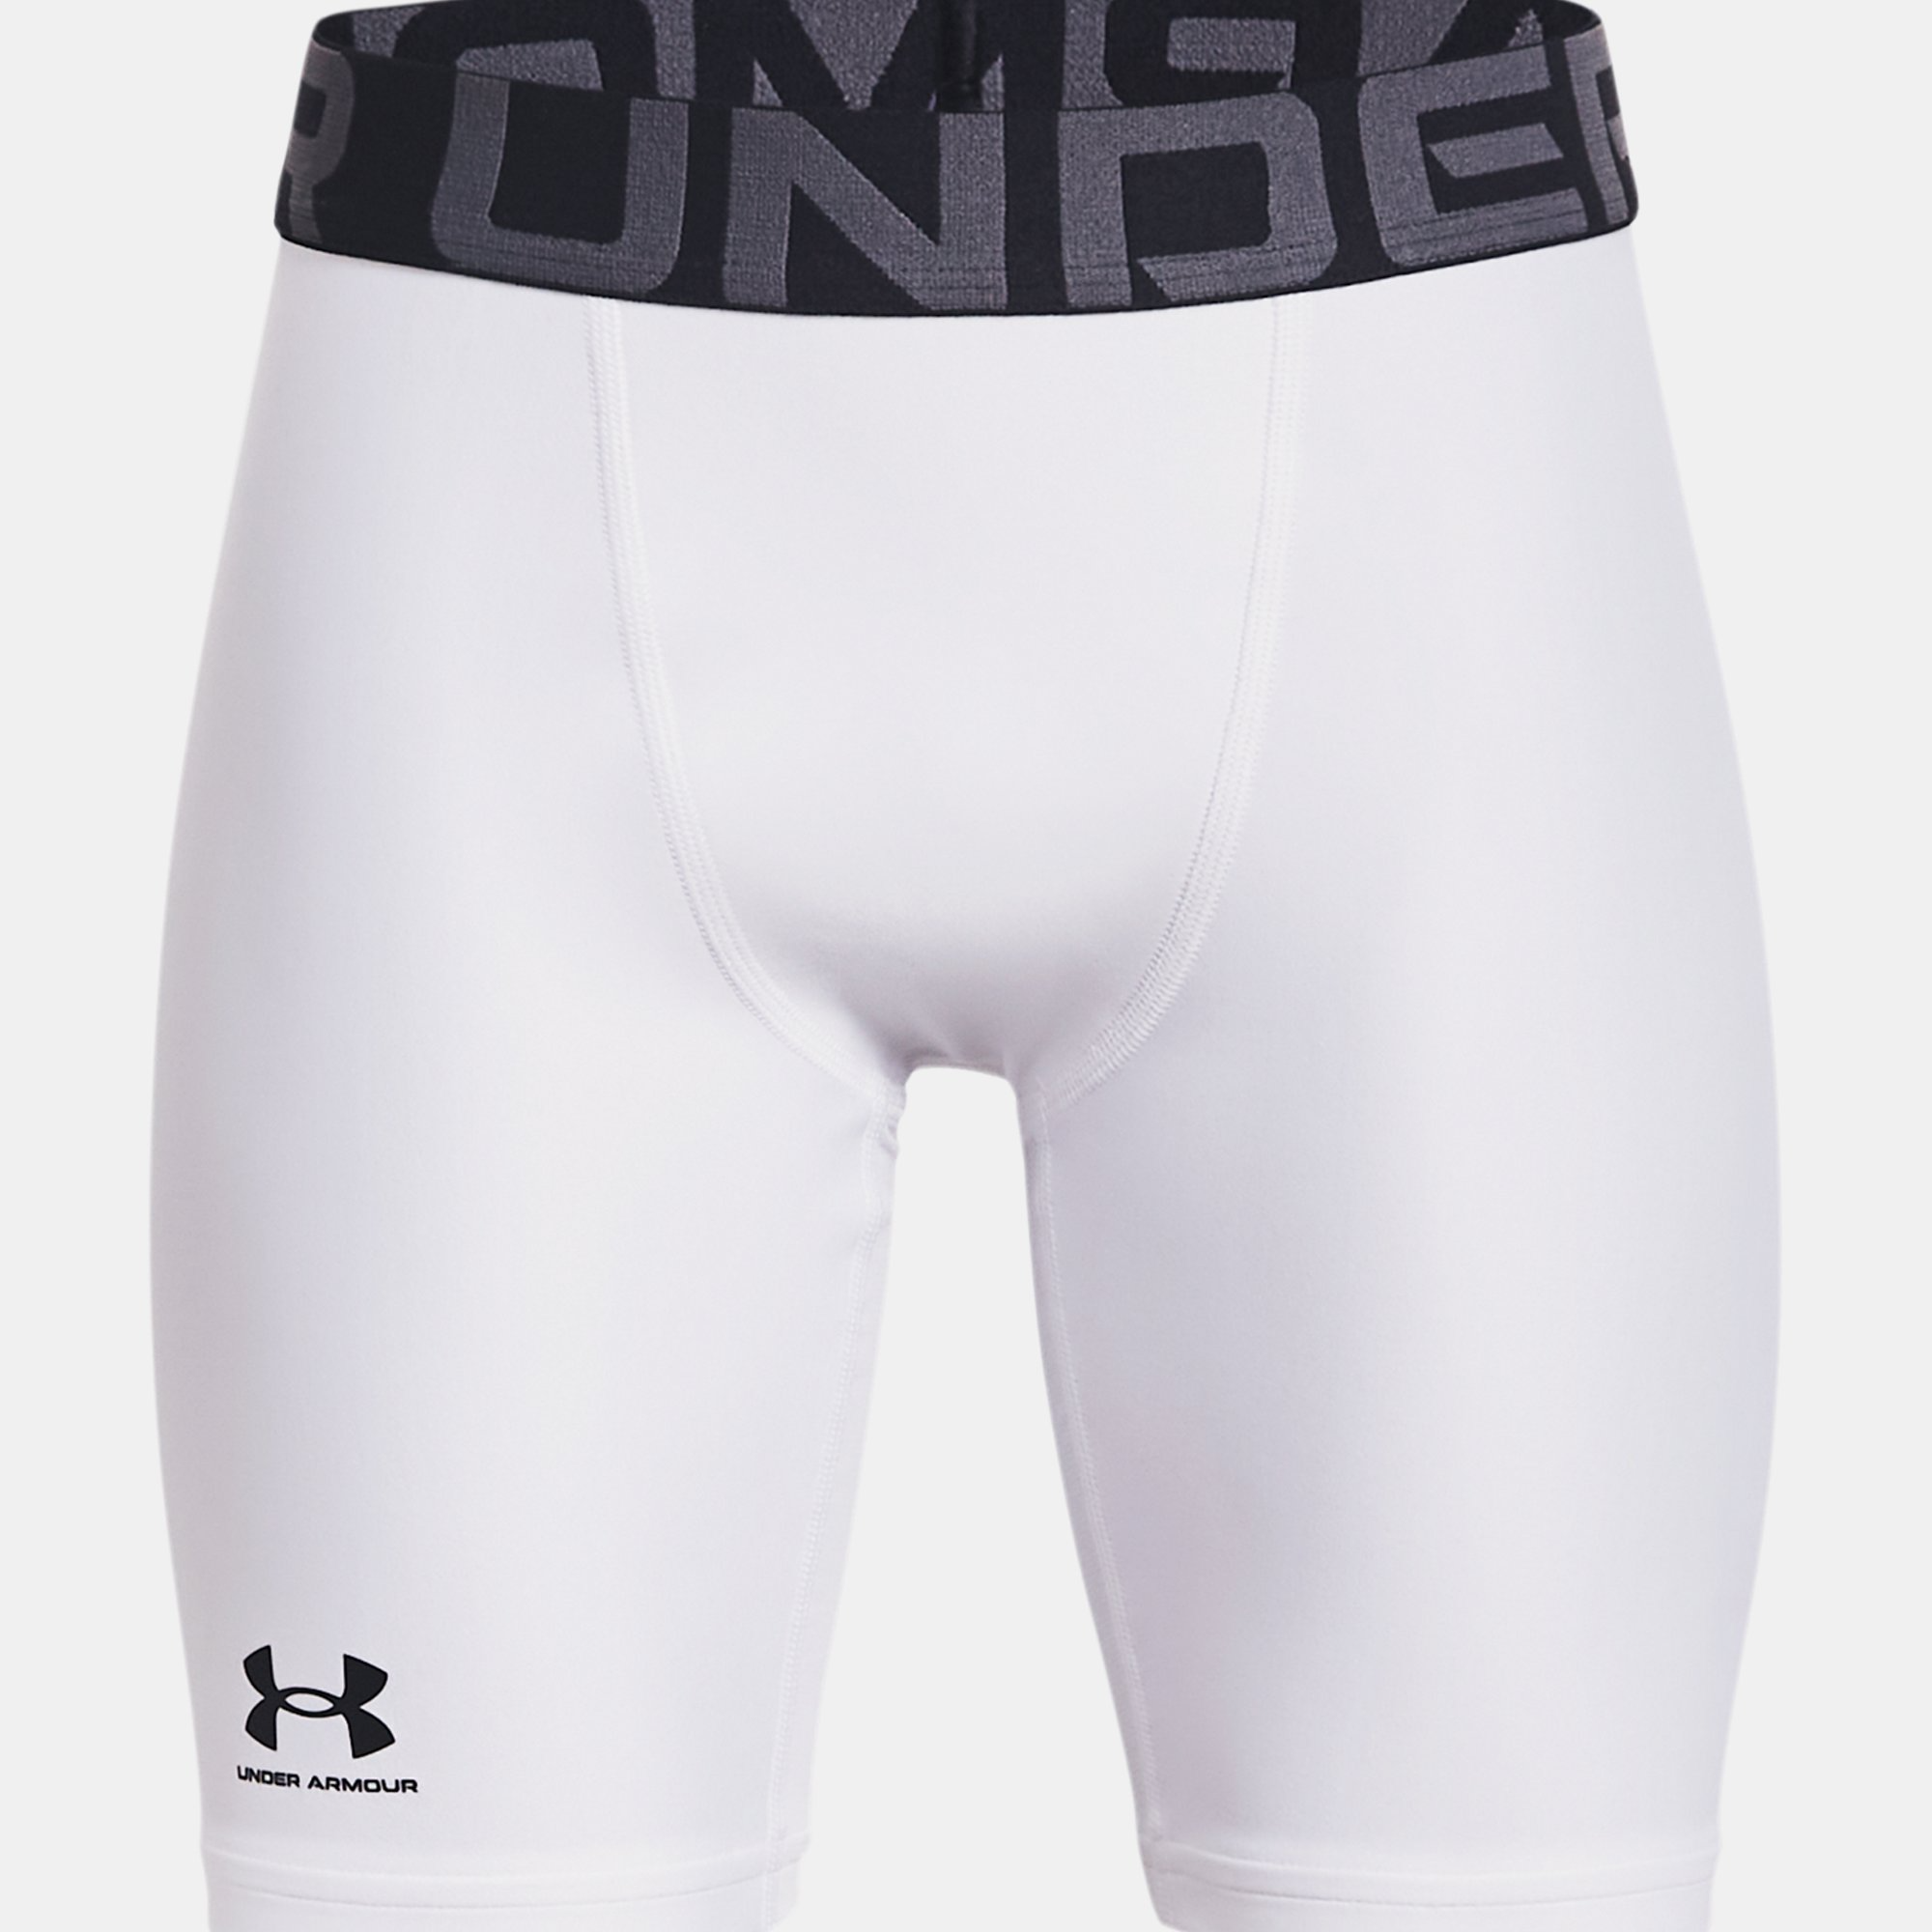 UA Youth HearGear Armour Compression Shorts - White